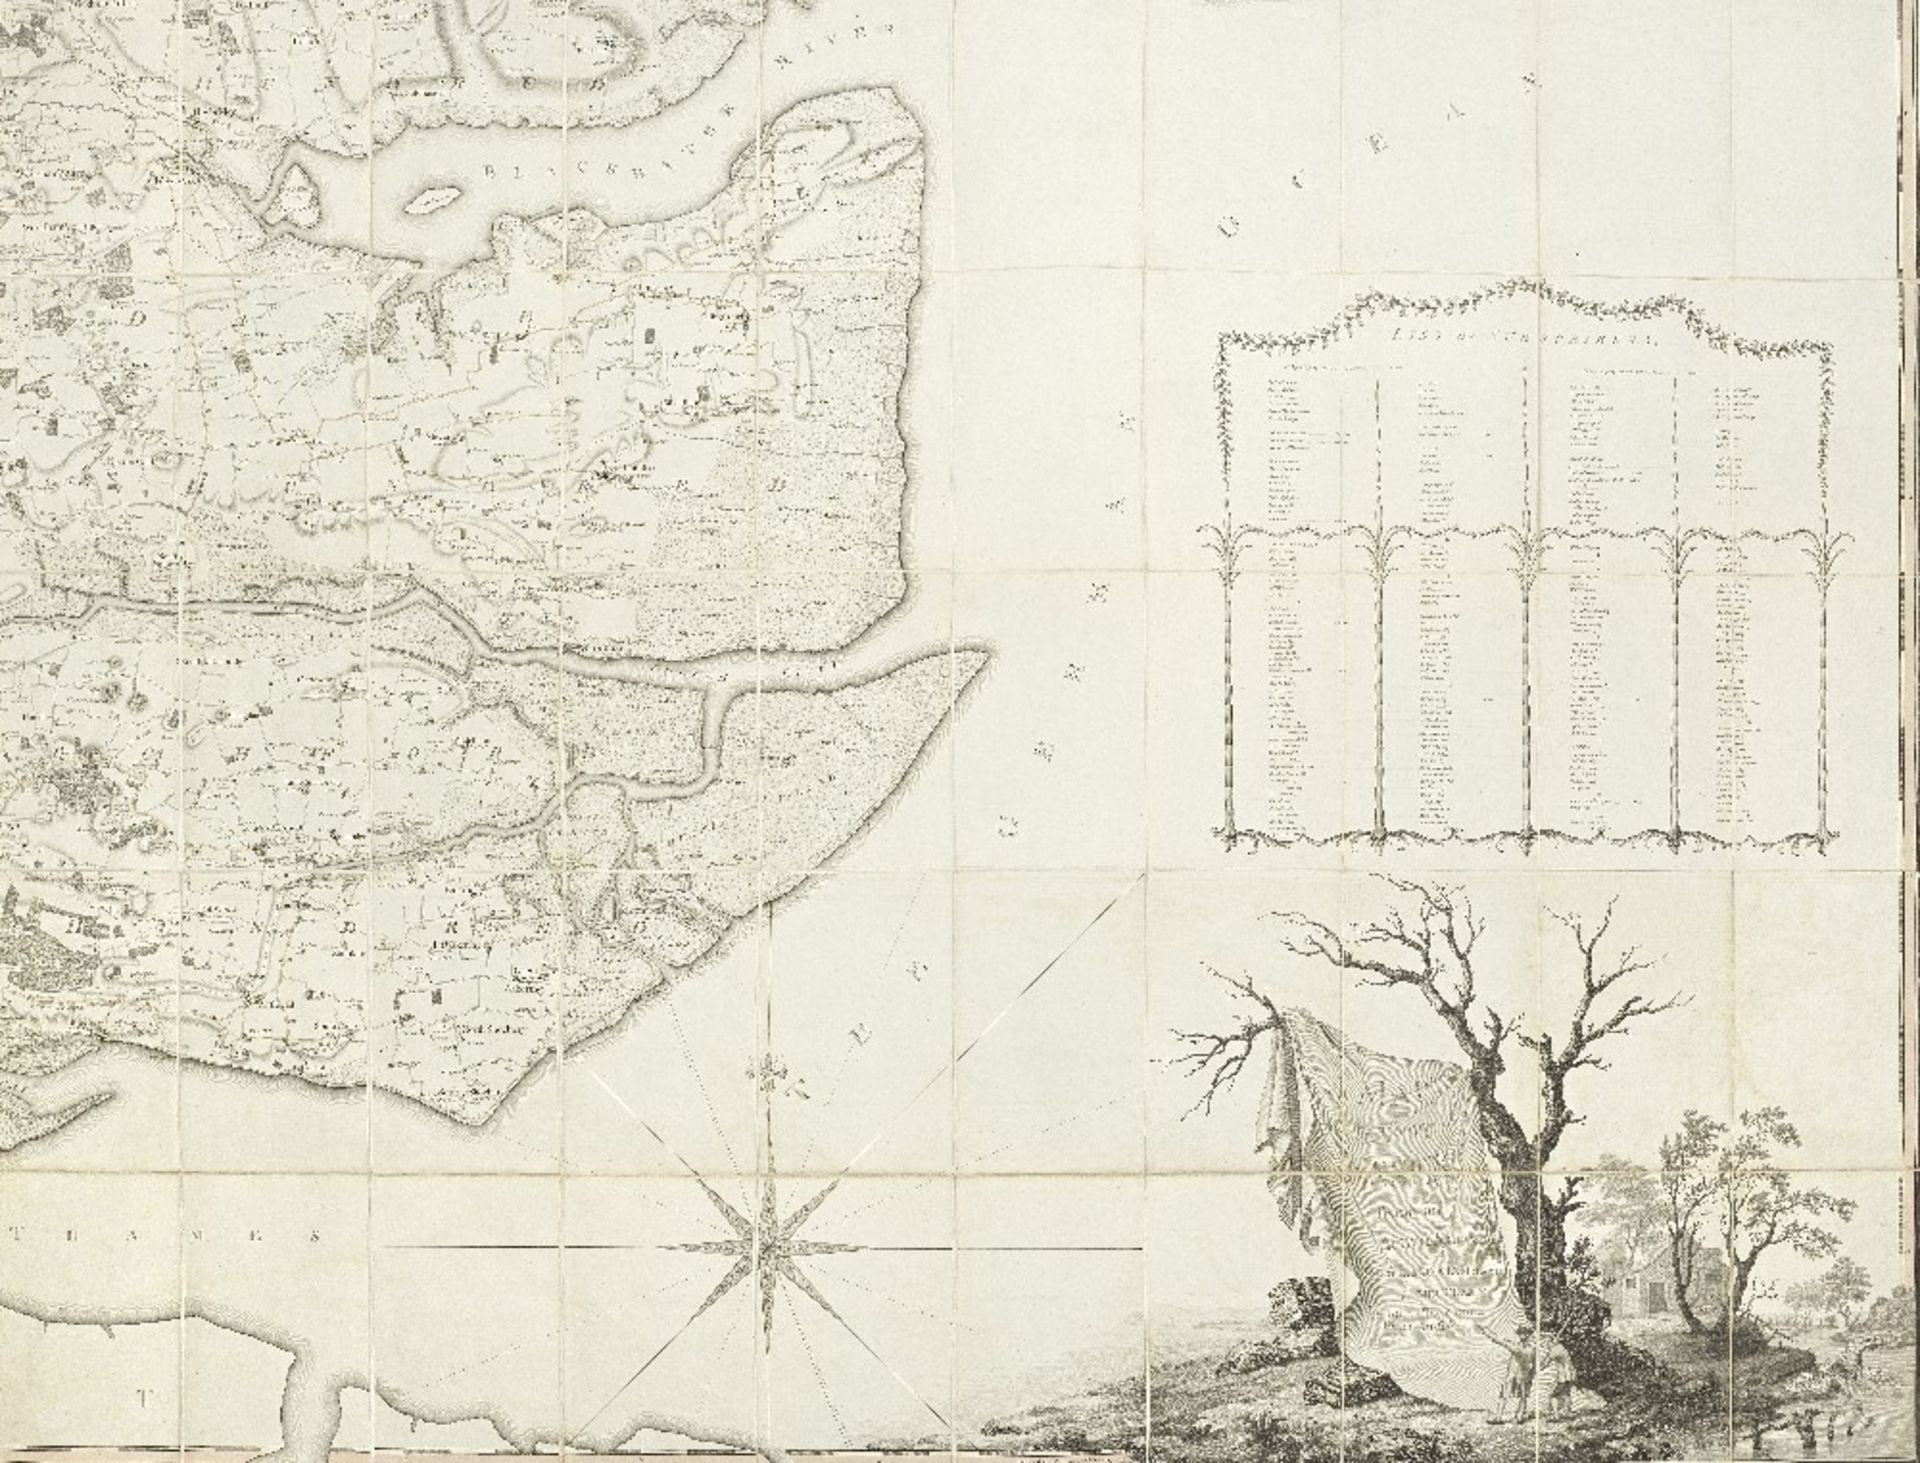 ESSEX CHAPMAN (JOHN) AND PETER ANDRE. A Map of the County of Essex From an Actual Survey made in...